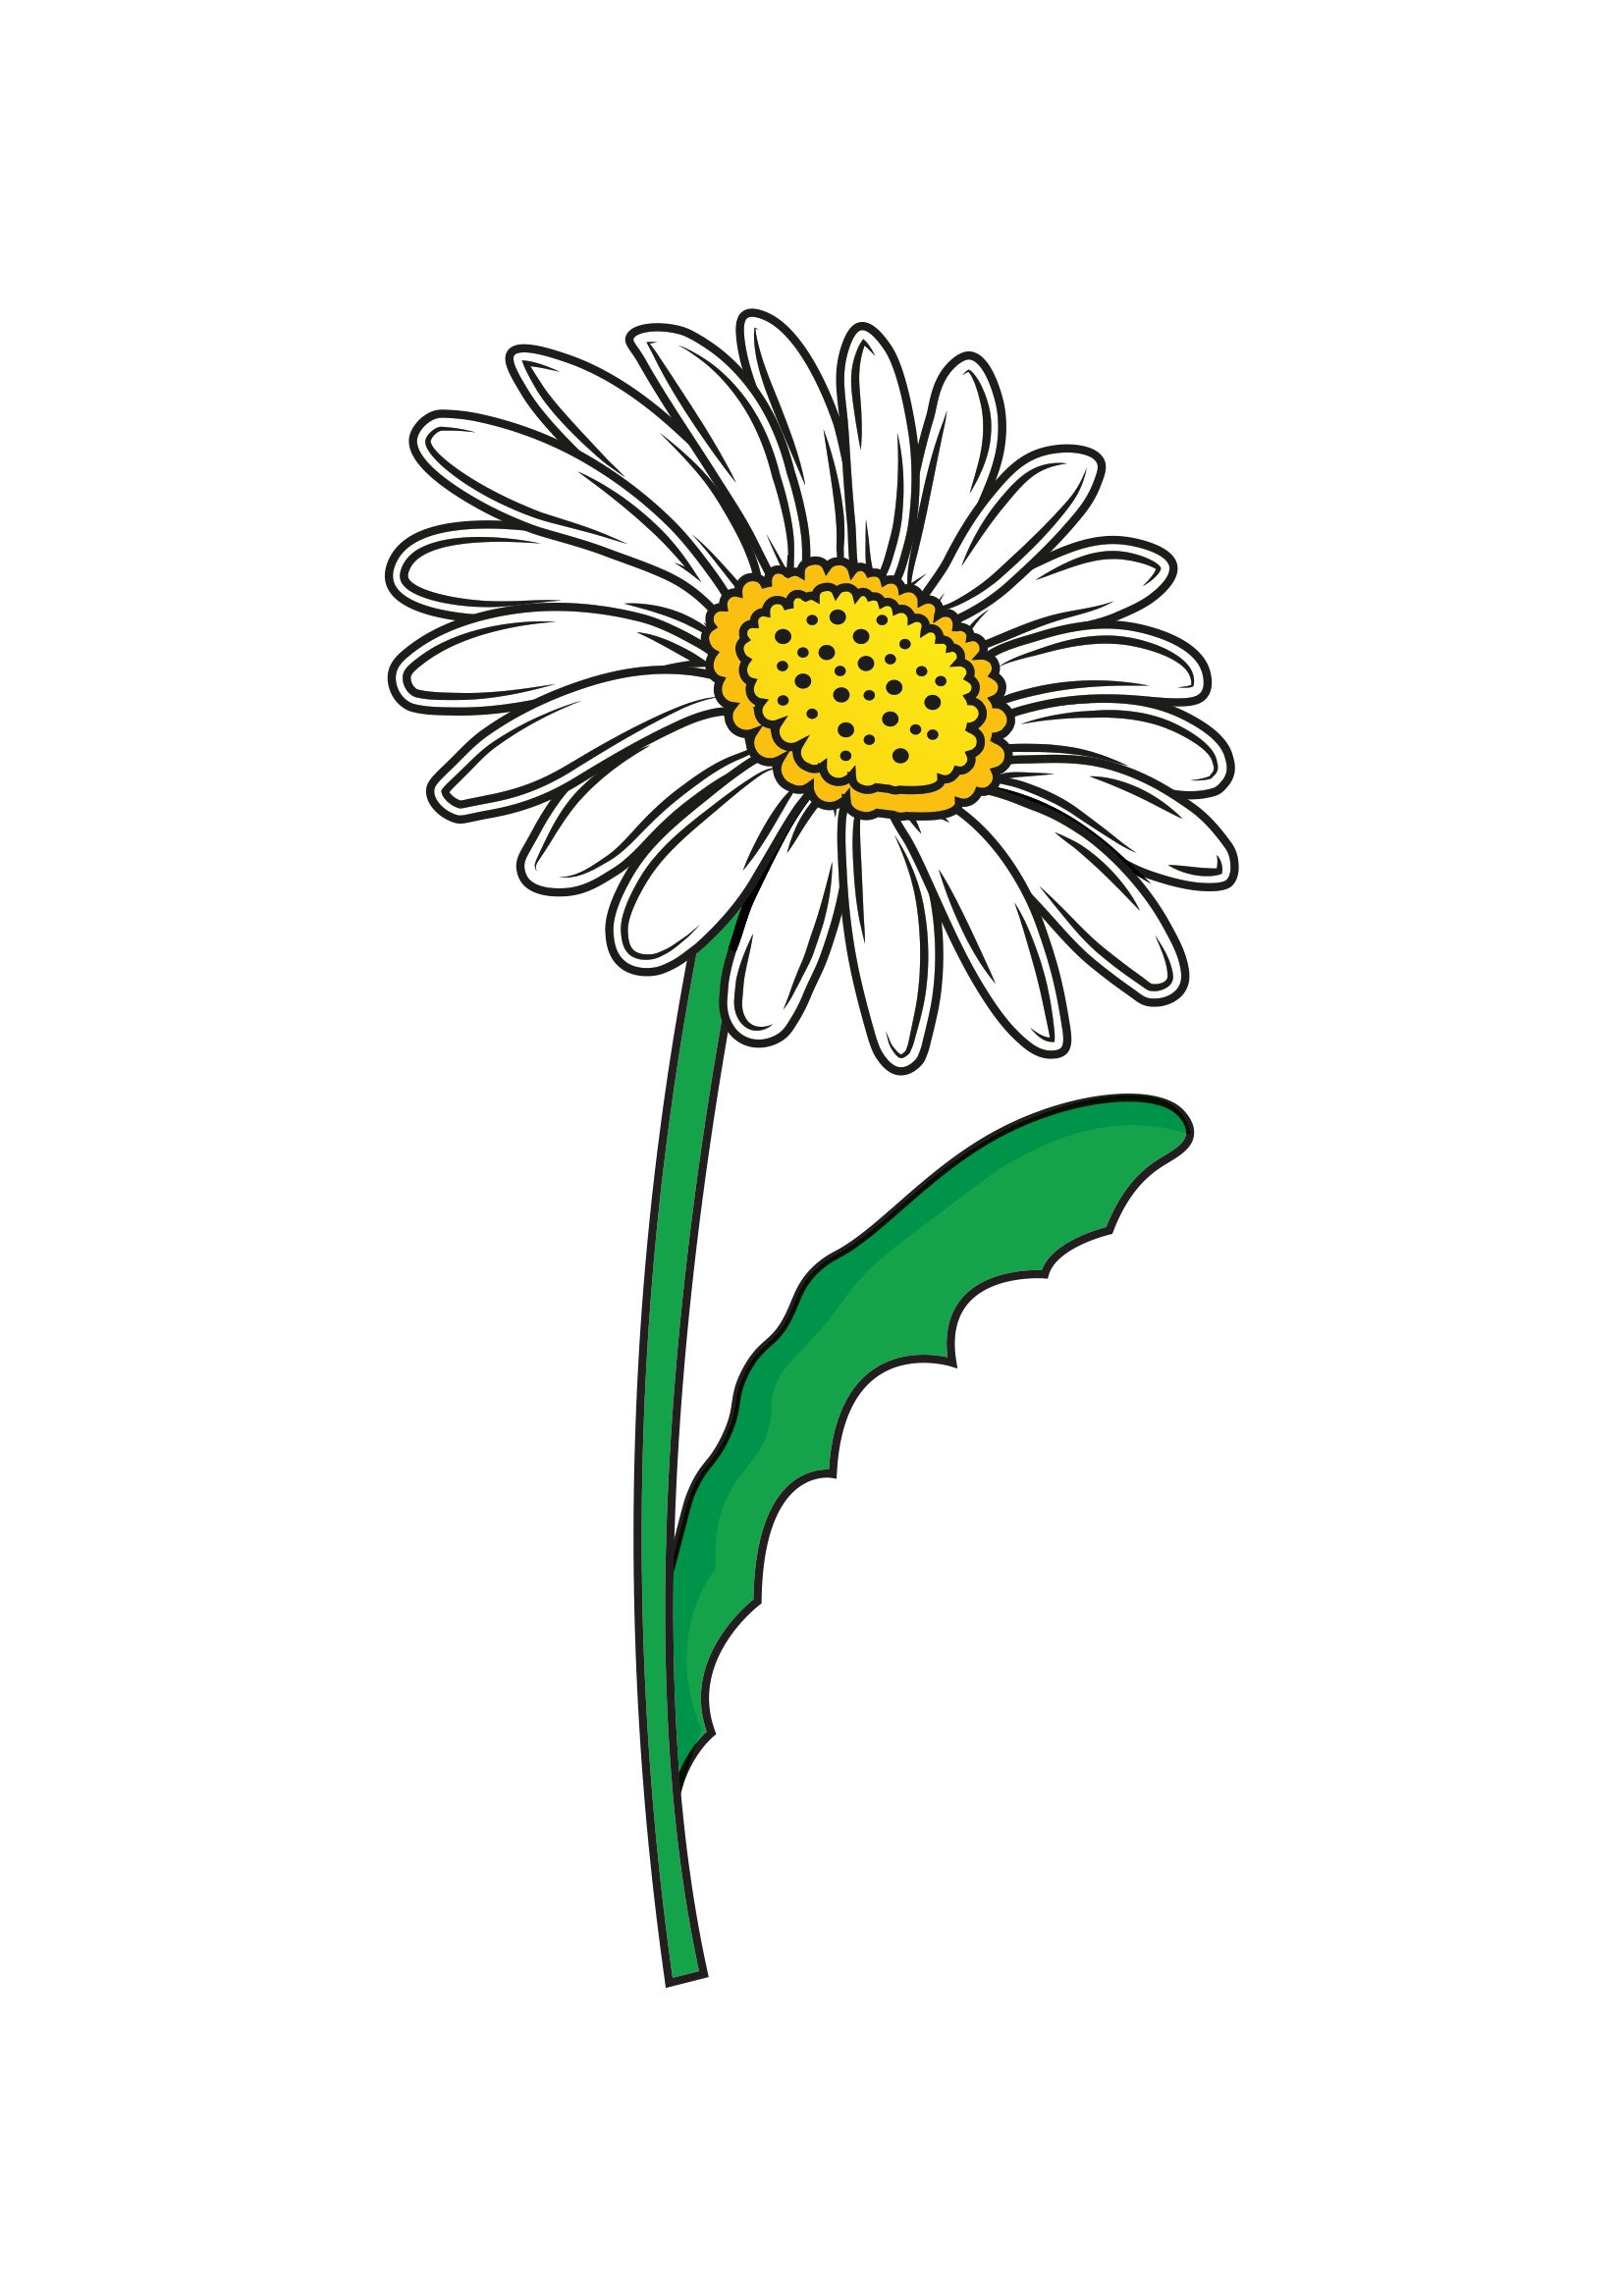 How to Draw A Daisy Step by Step Printable